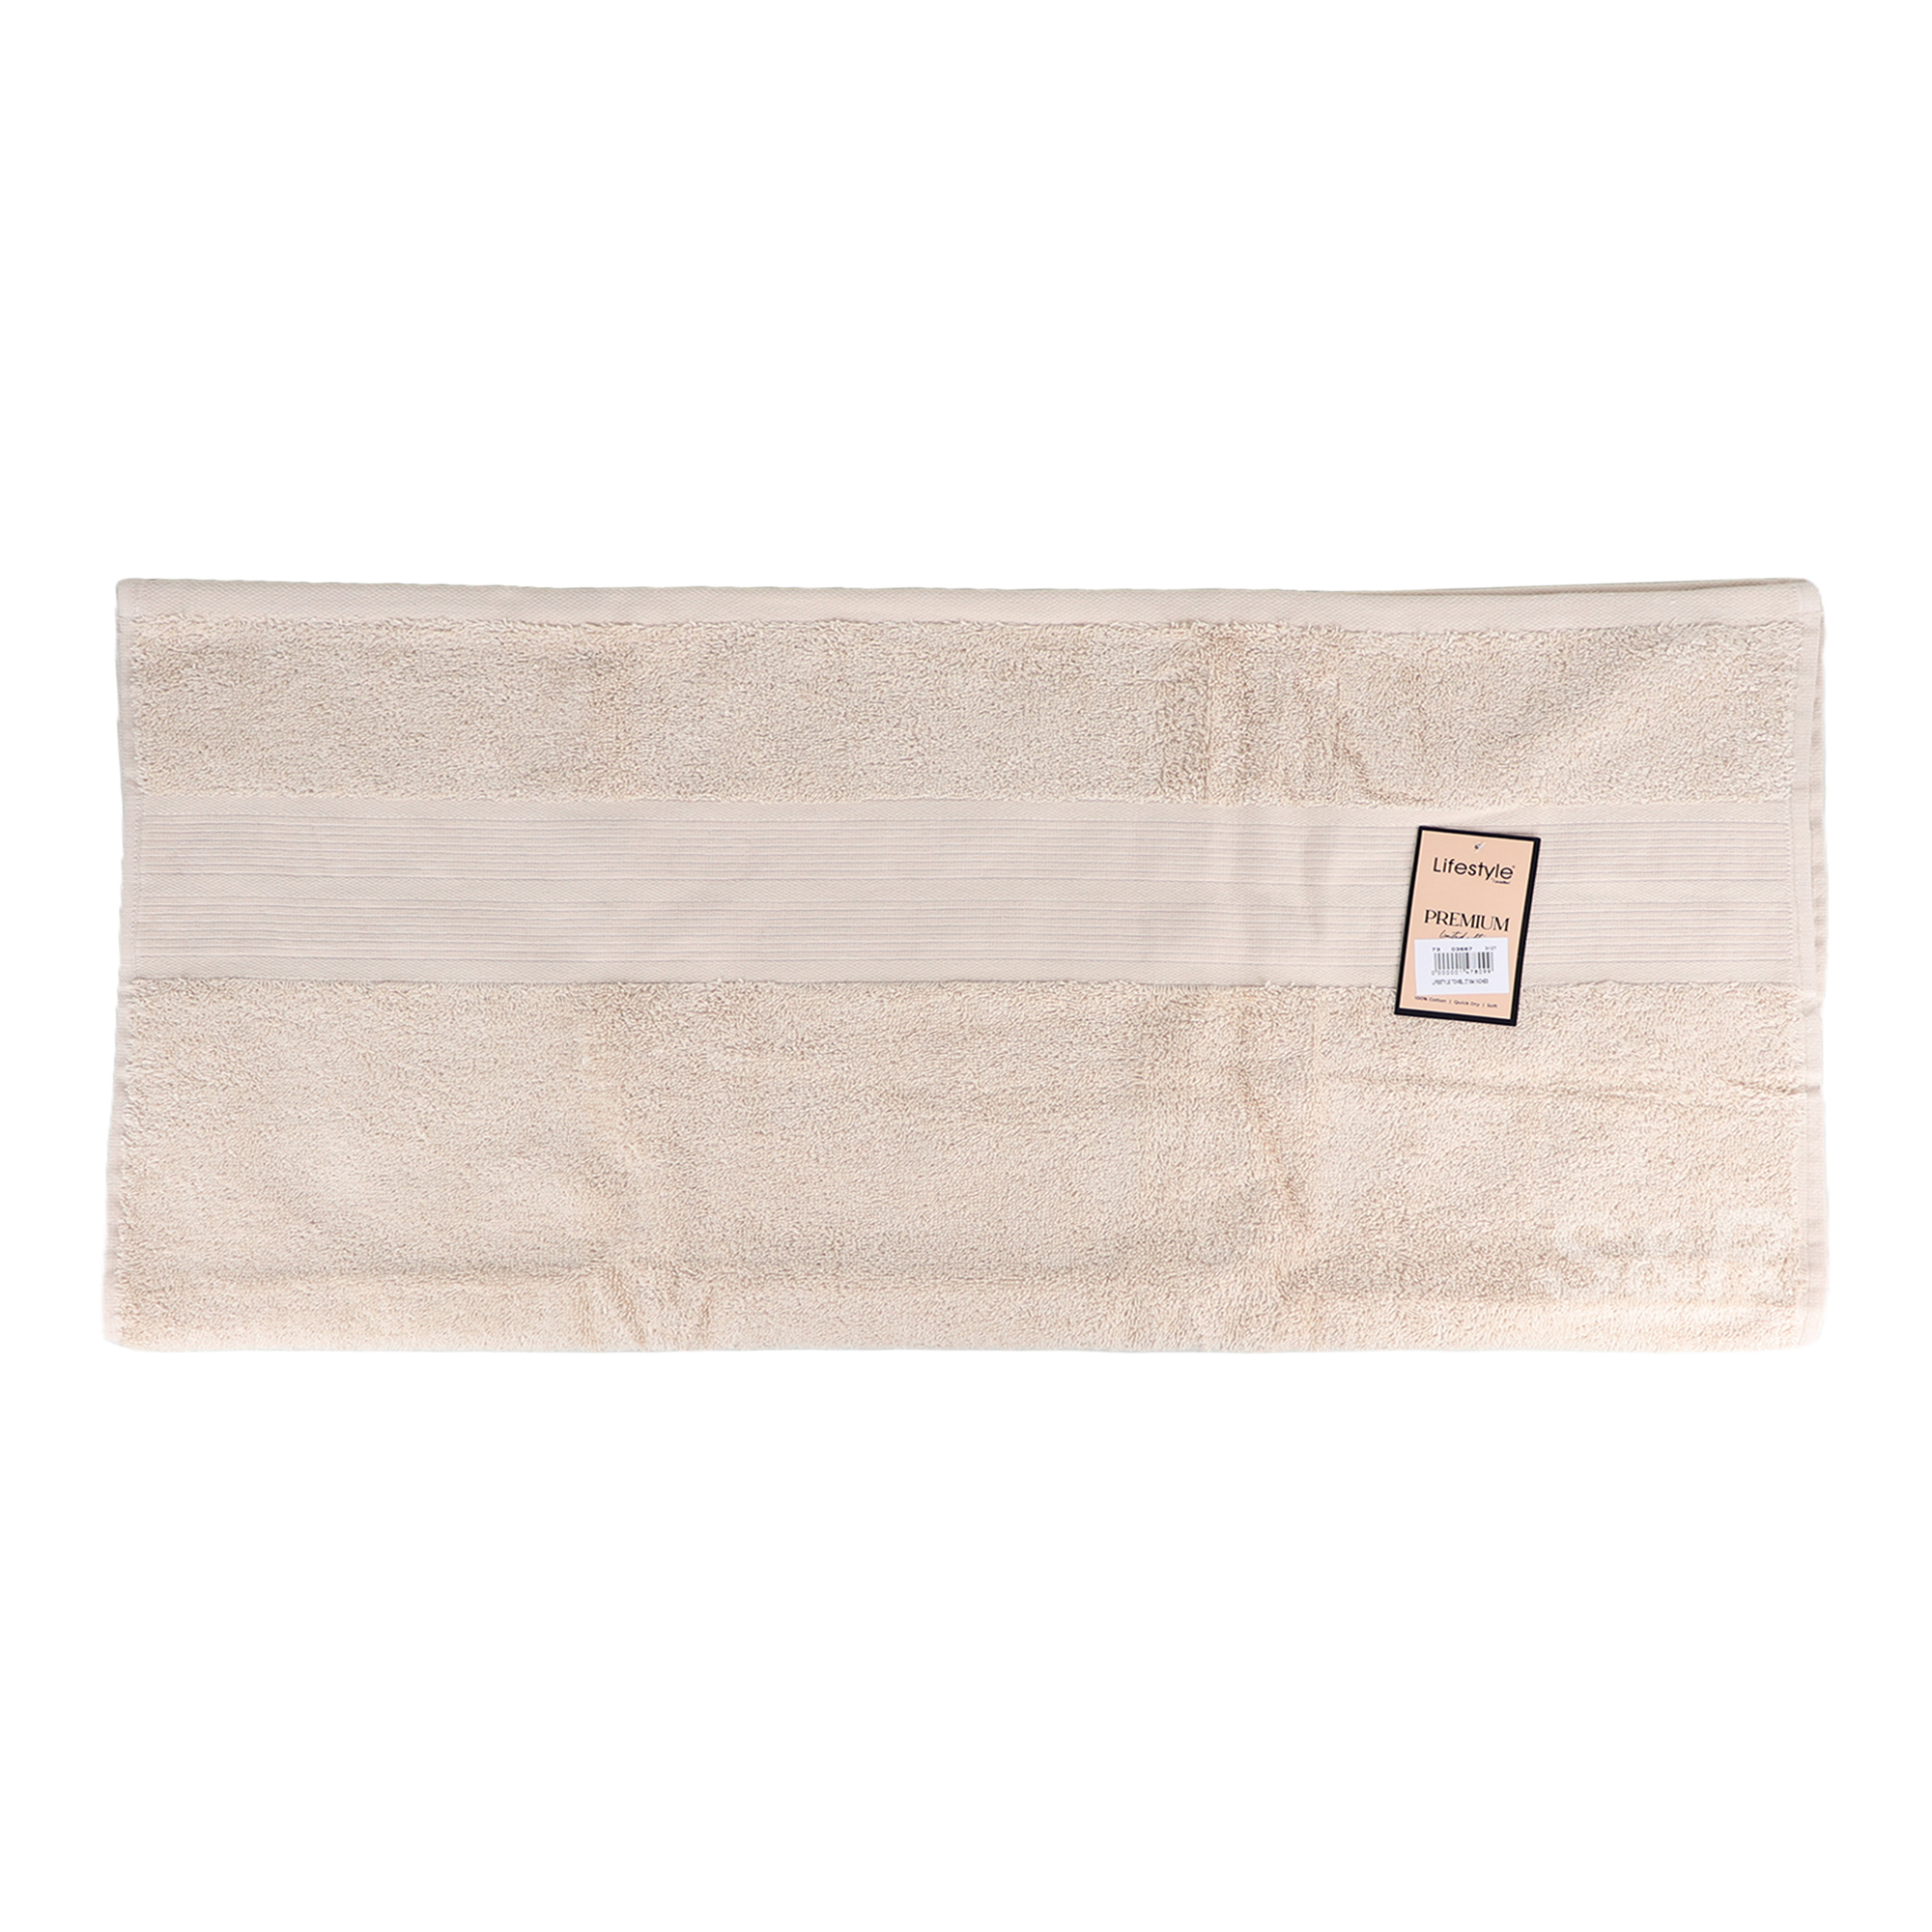 Lifestyle by Canadian Premium Towel 27x54in